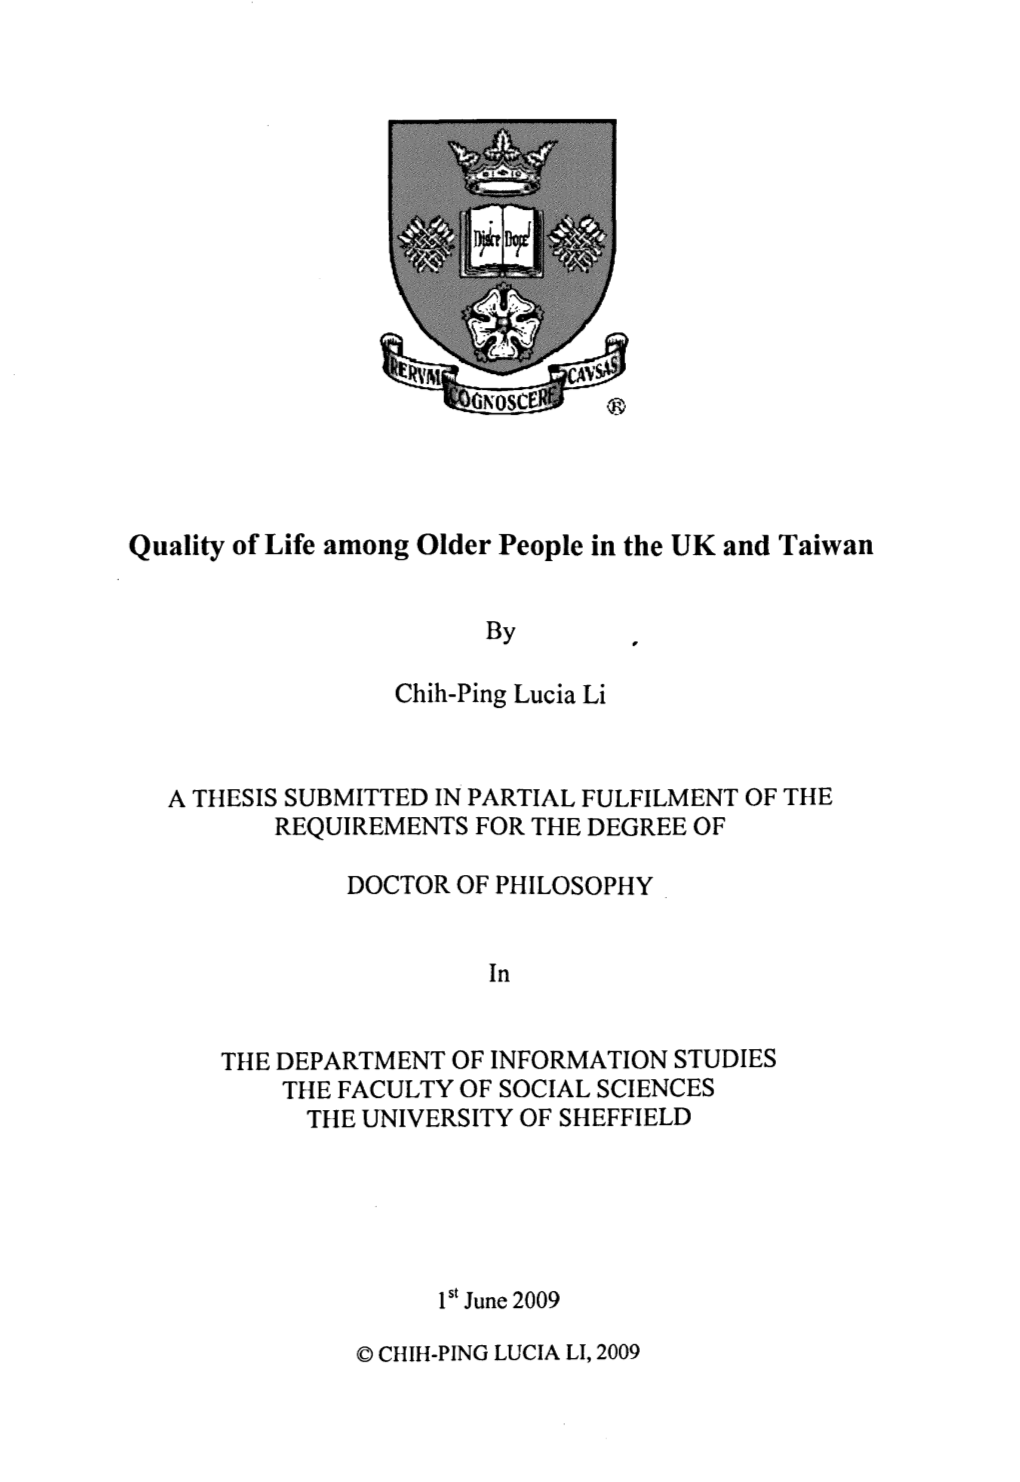 Quality of Life Among Older People in the UK and Taiwan